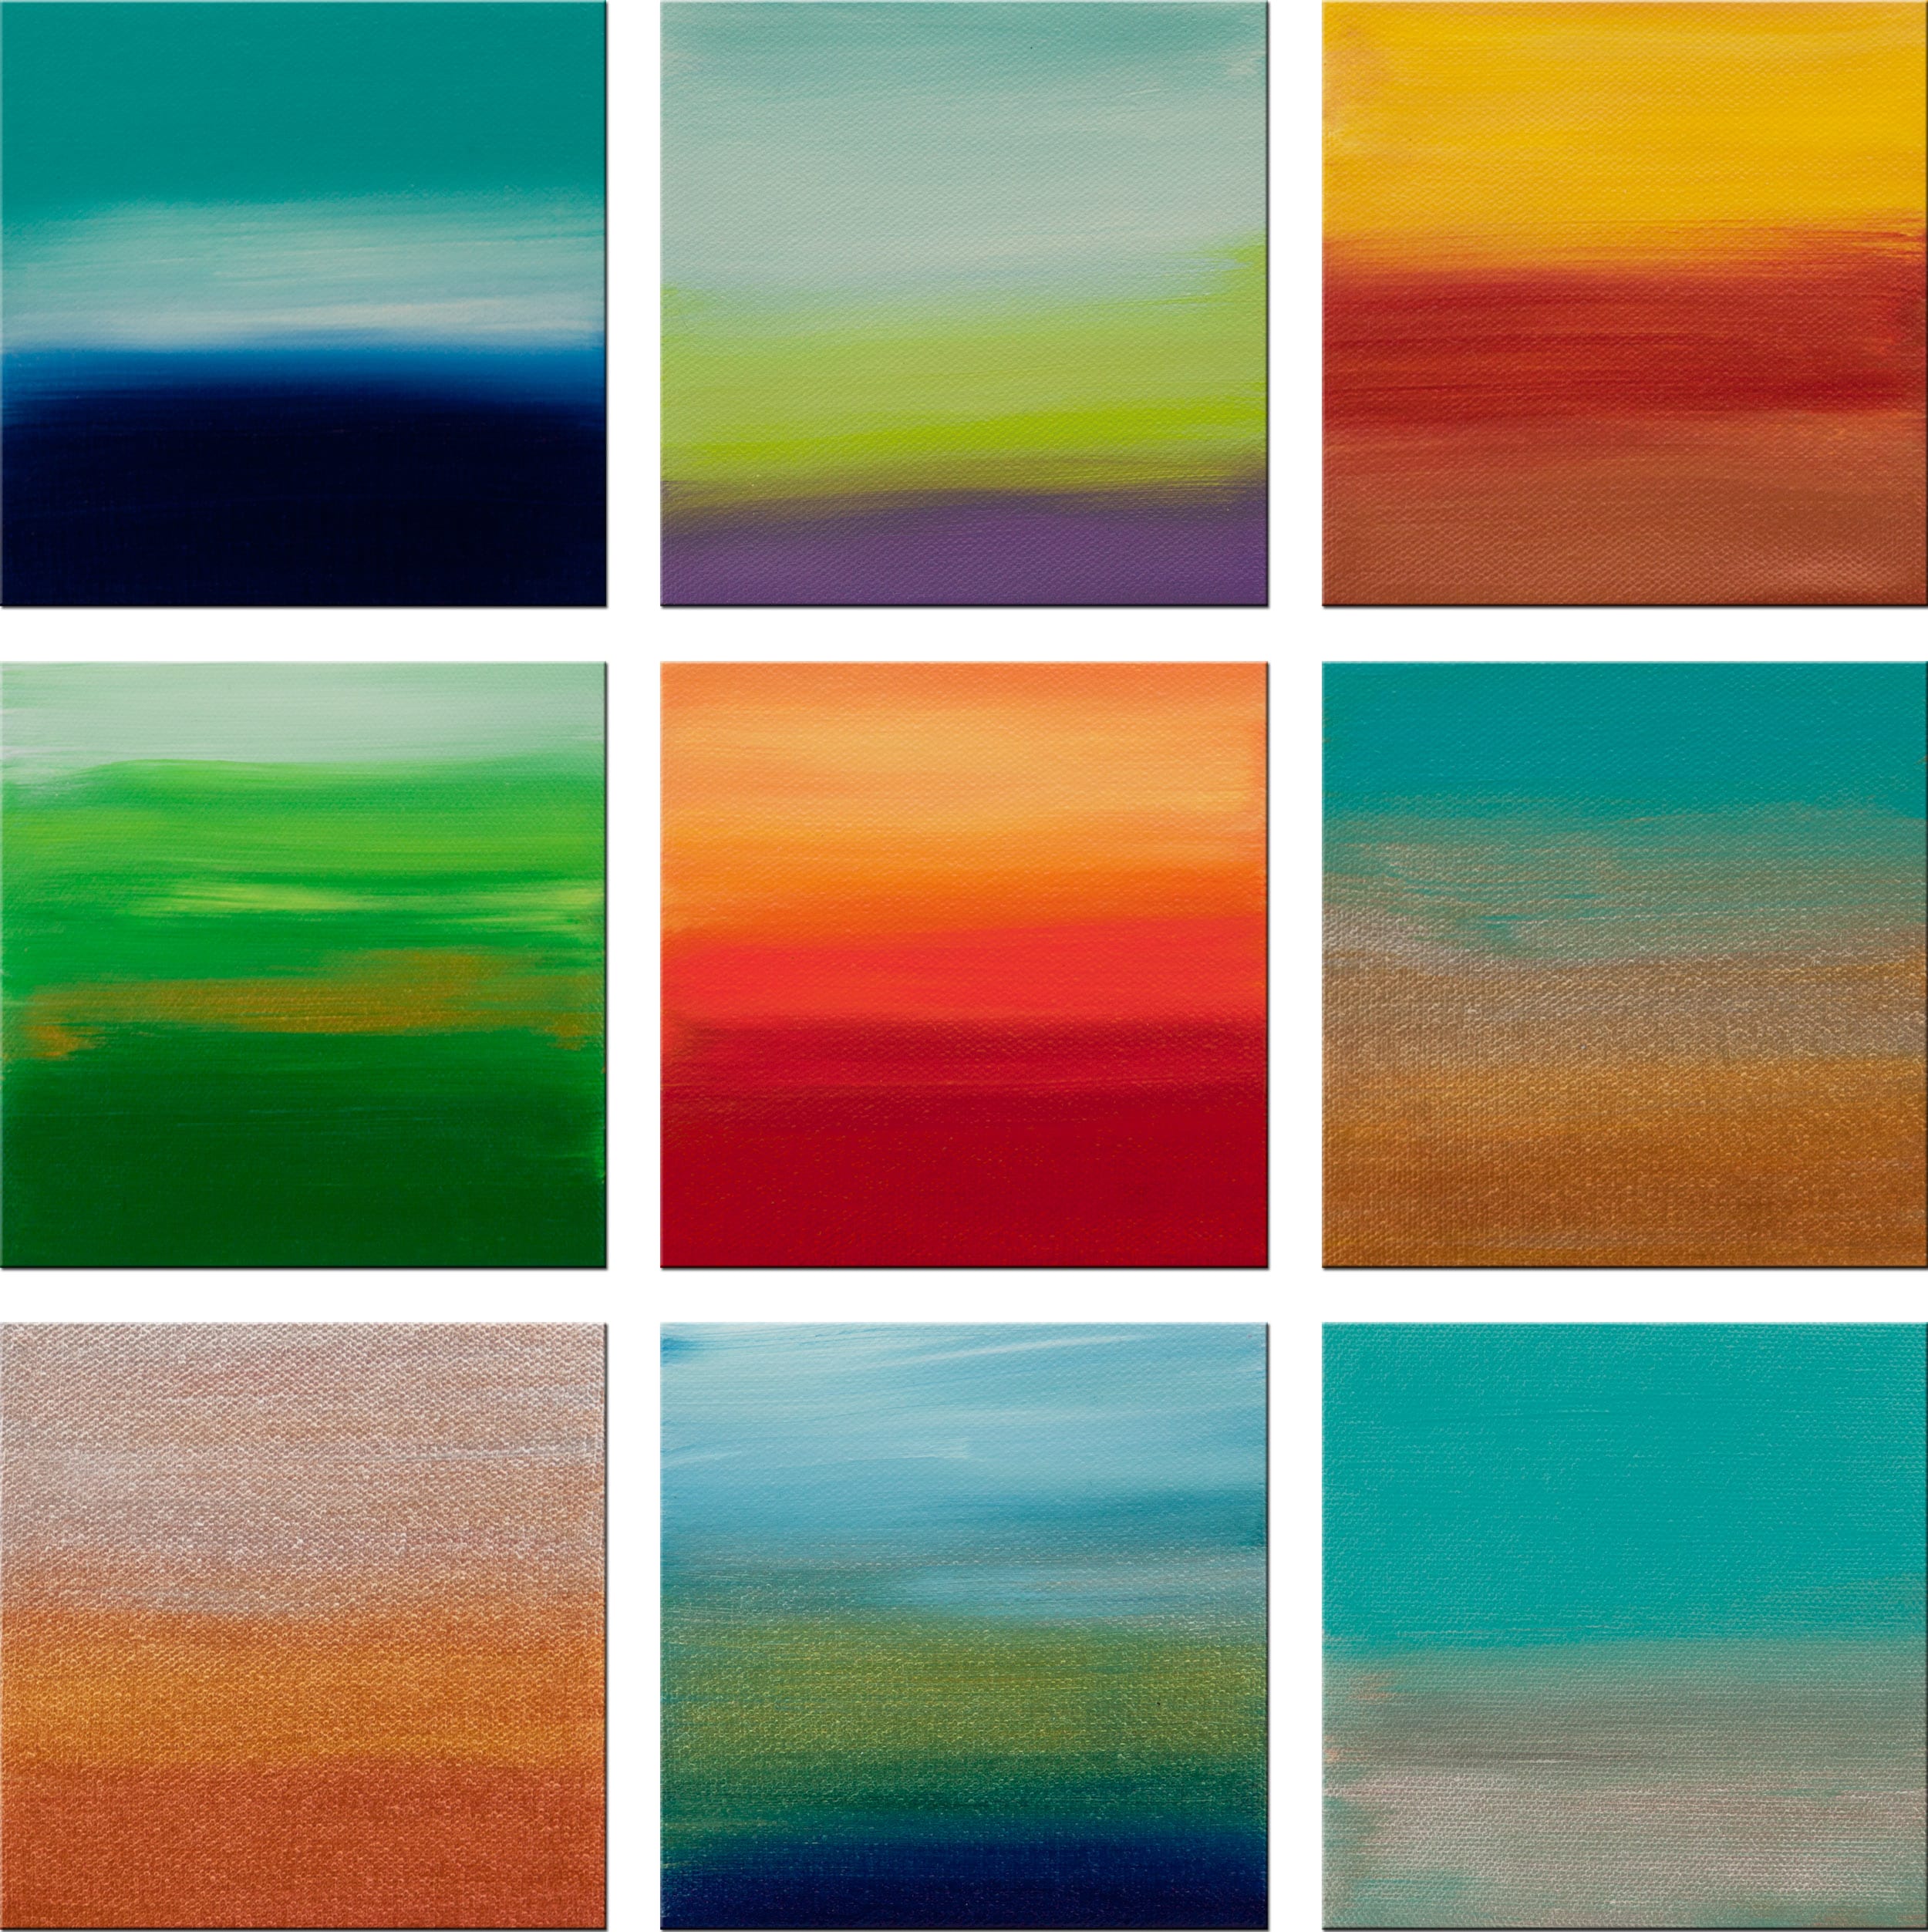 Sunrise Series Collection 8 - 15x15 Inches - Hilary Winfield Fine Art